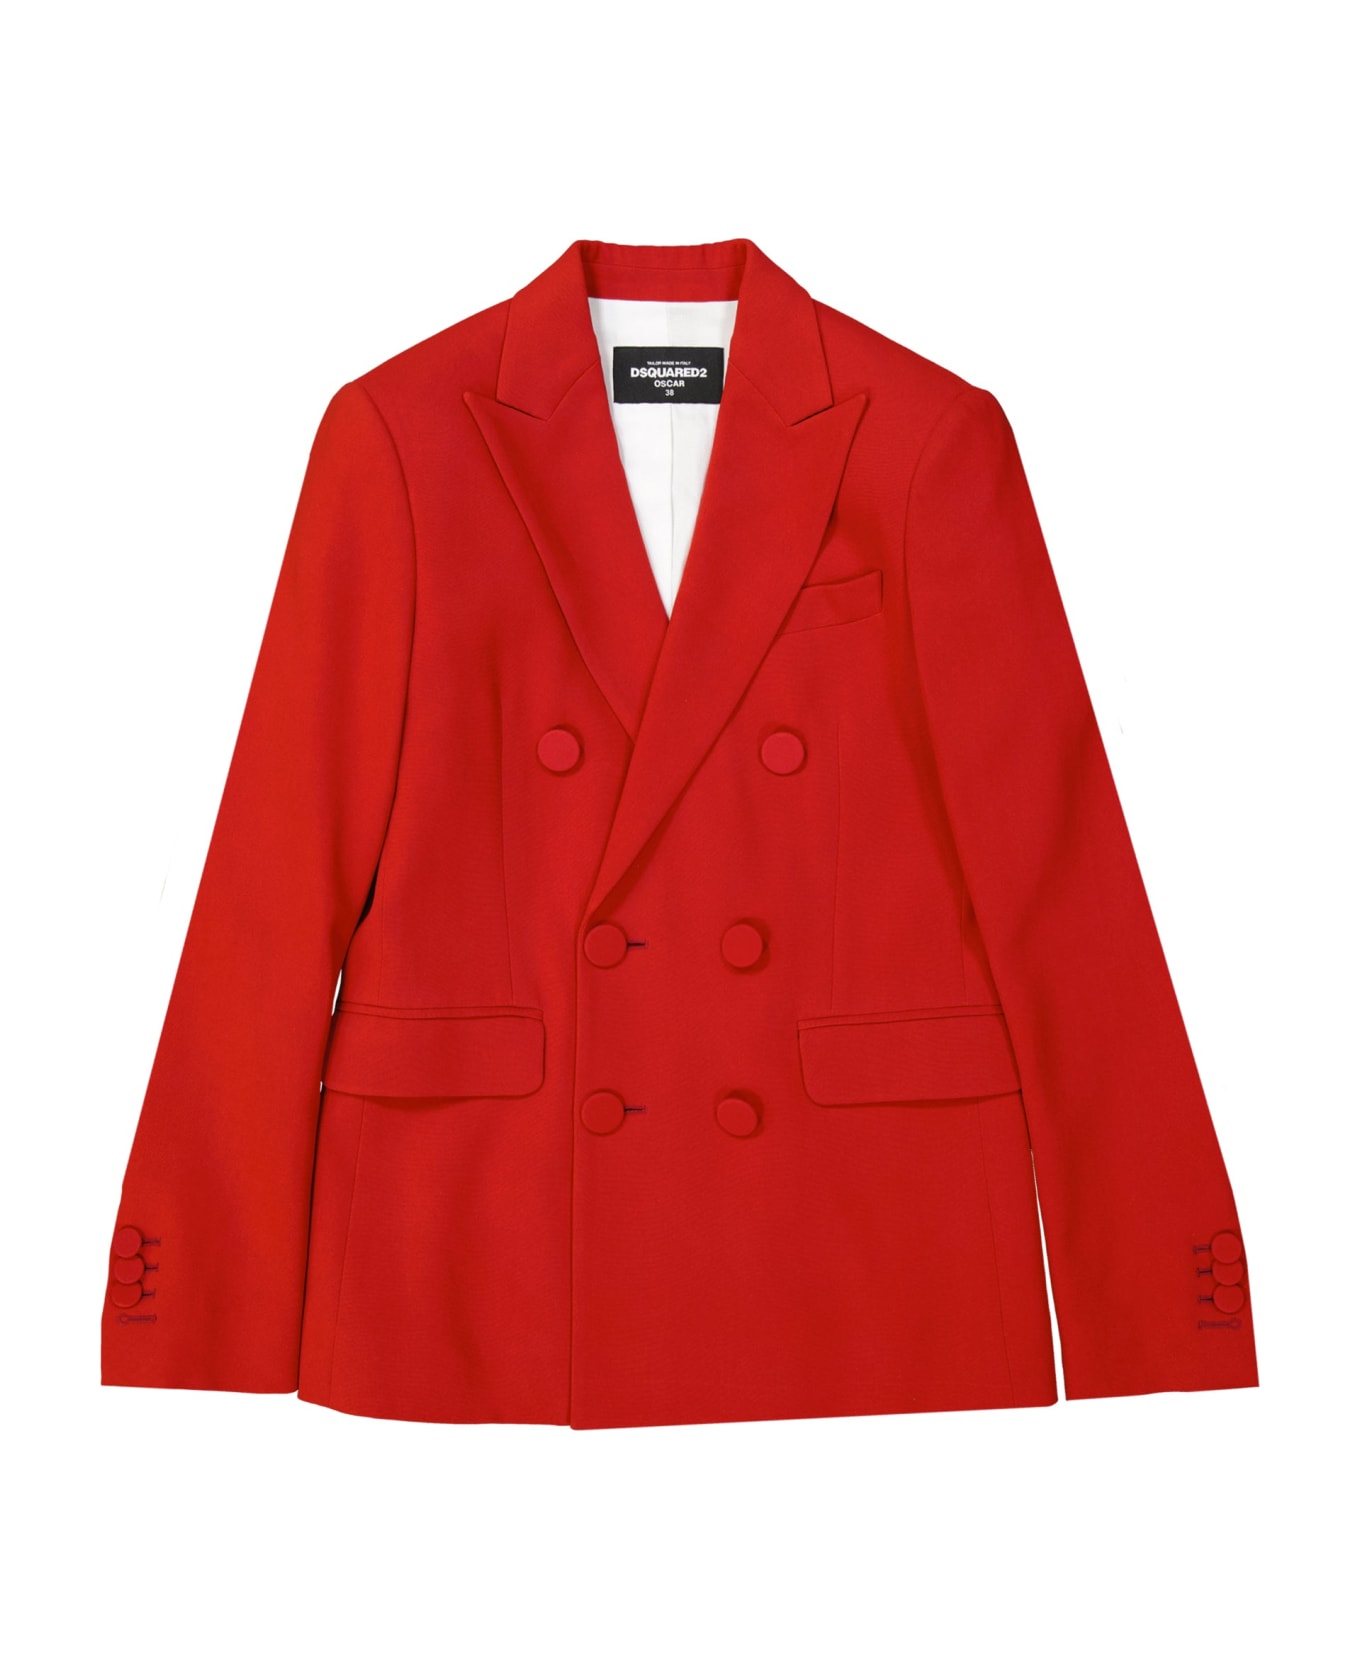 Dsquared2 Double-breasted Jacket - Red